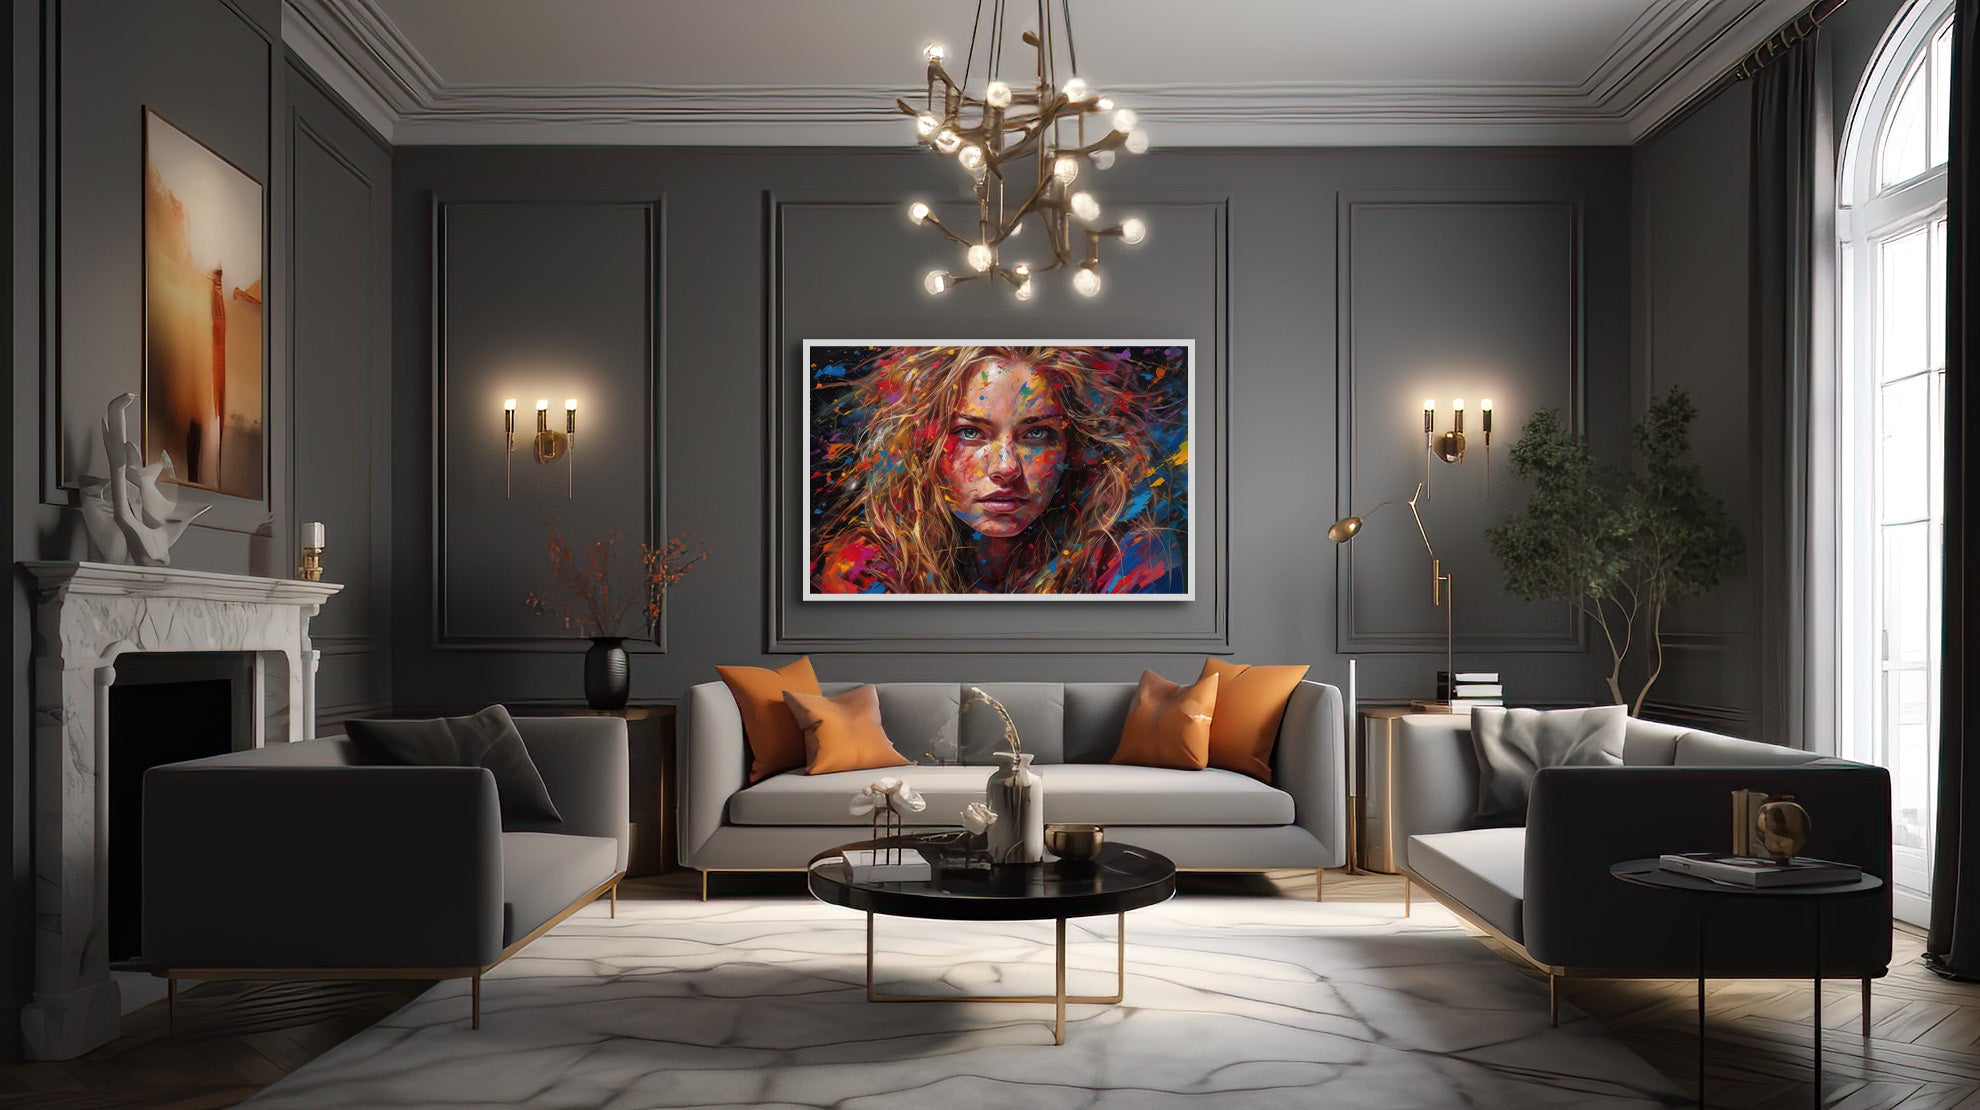 Blonde lady in an explosion of colours - Radiant Aura wall art